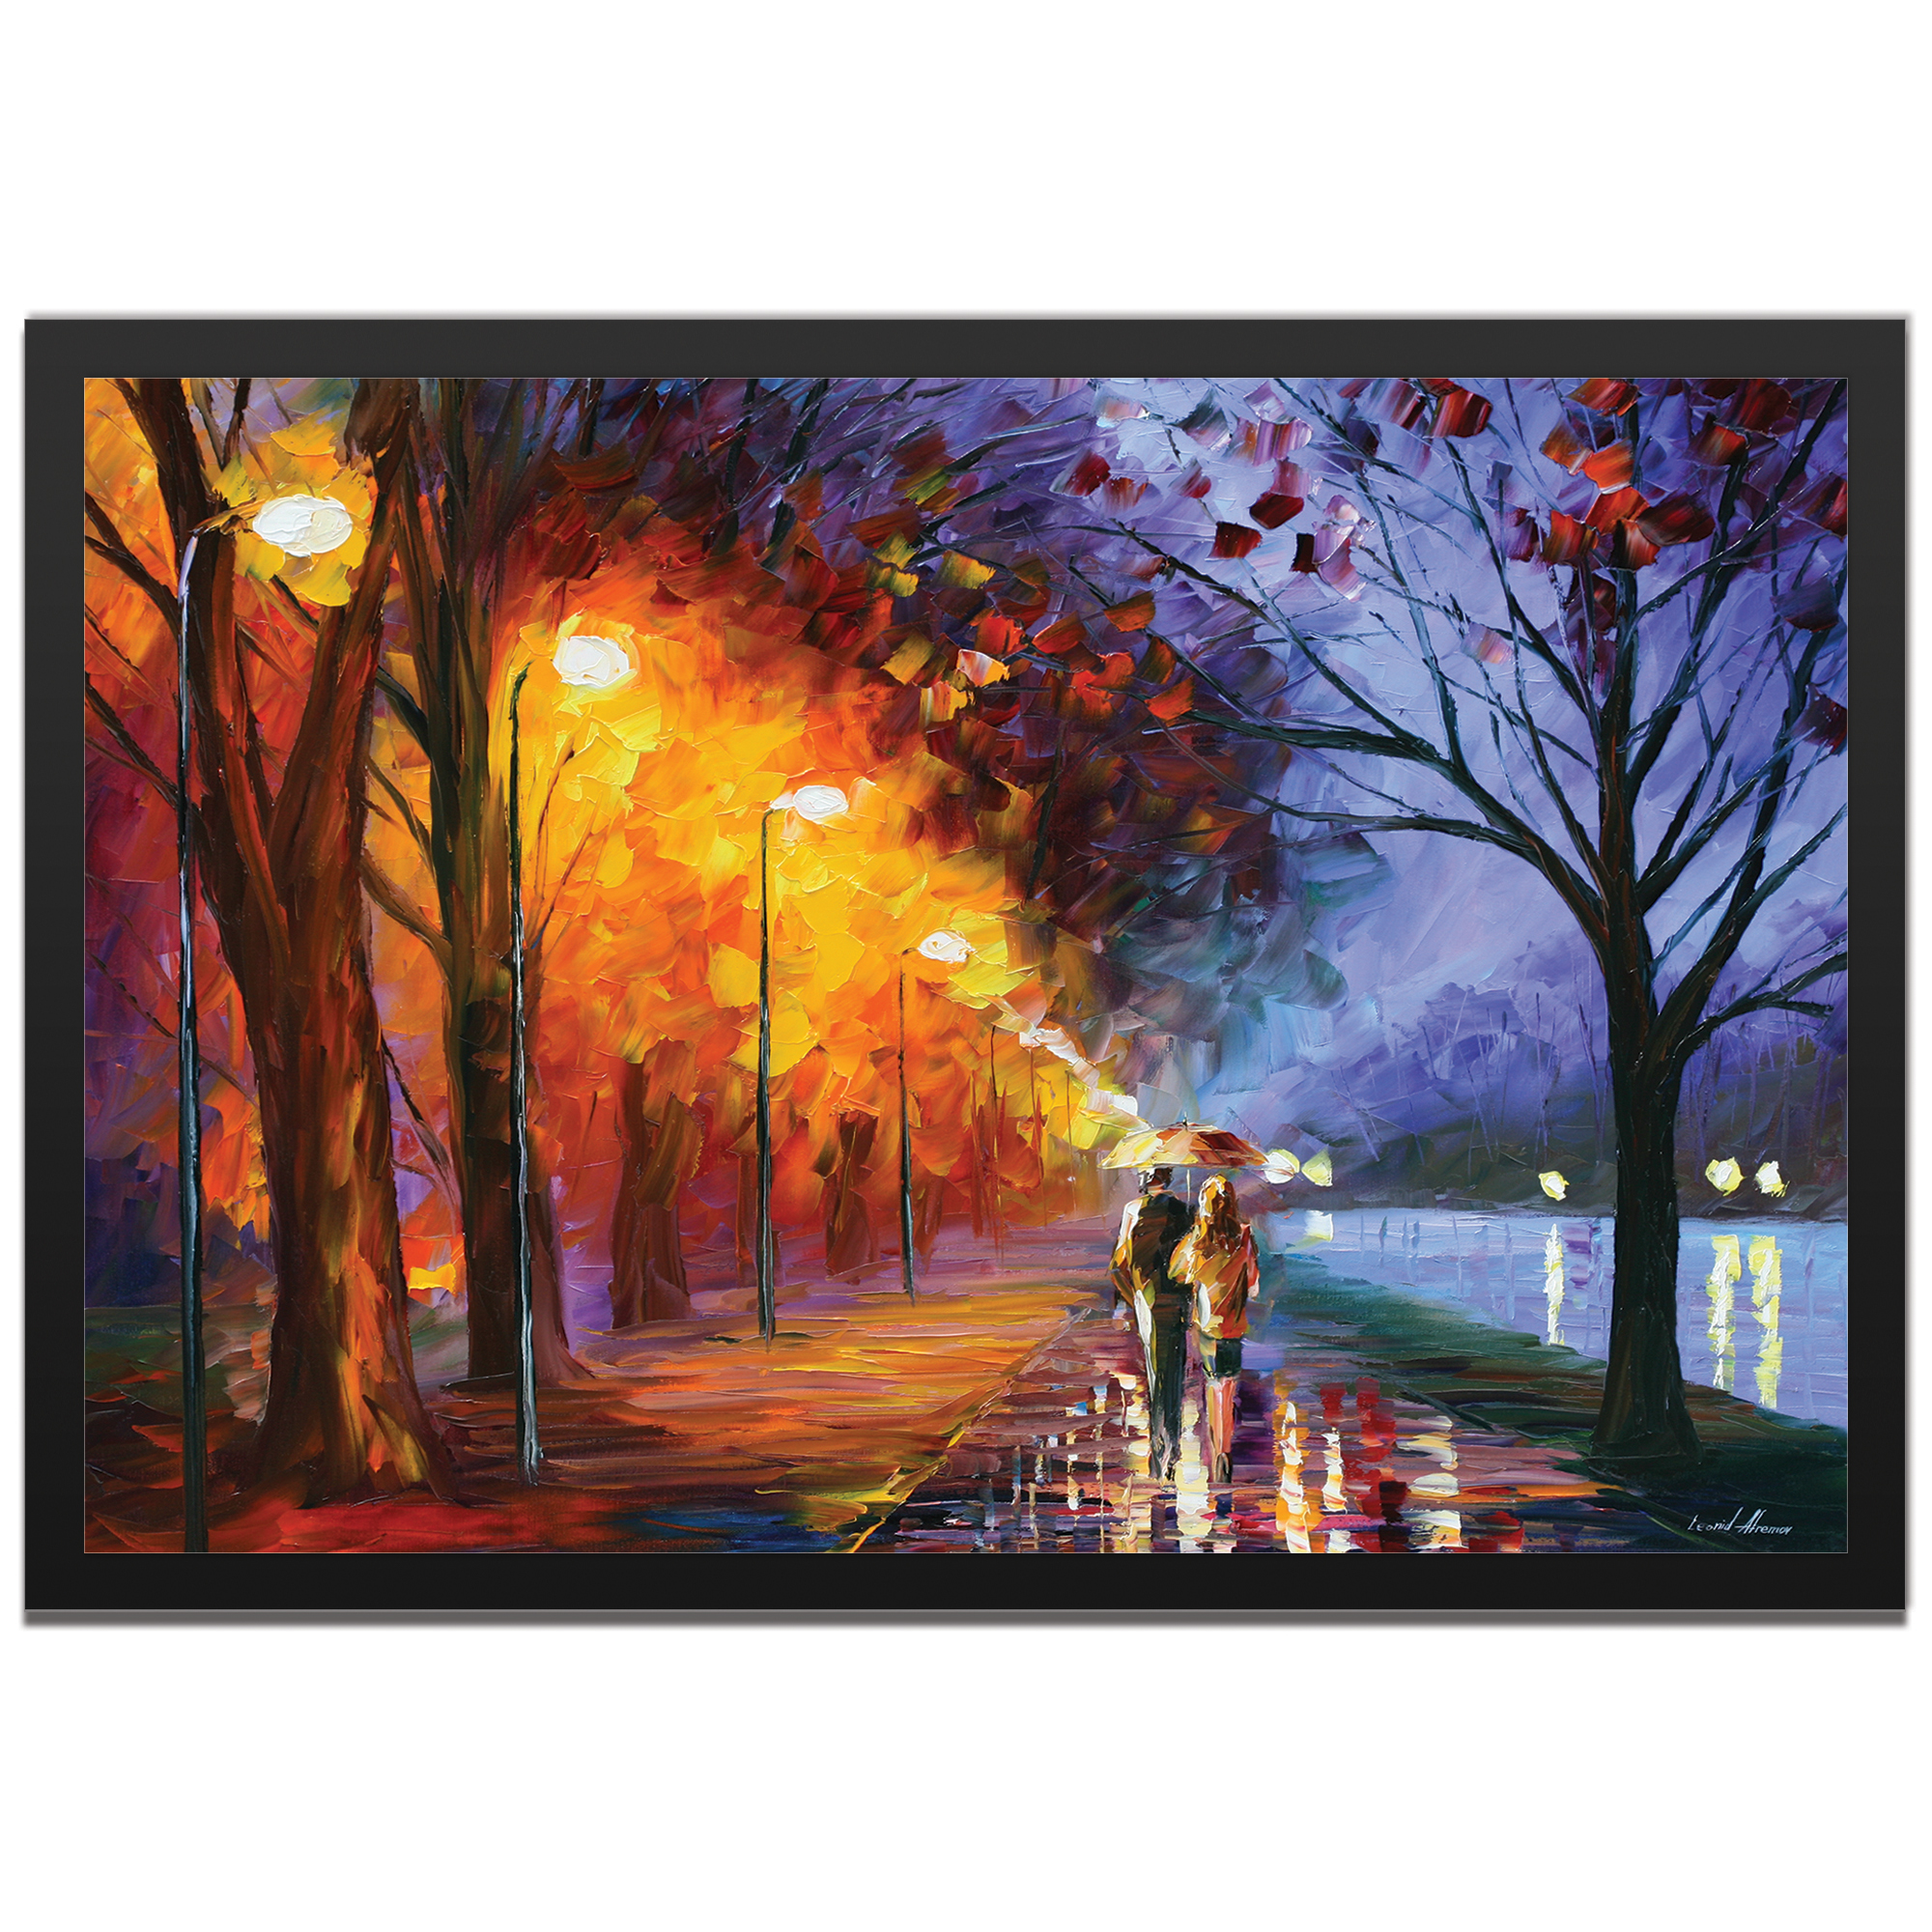 Leonid Afremov 'Alley By The Lake Framed' 32in x 22in Abstract Cityscape Art on Colored Metal